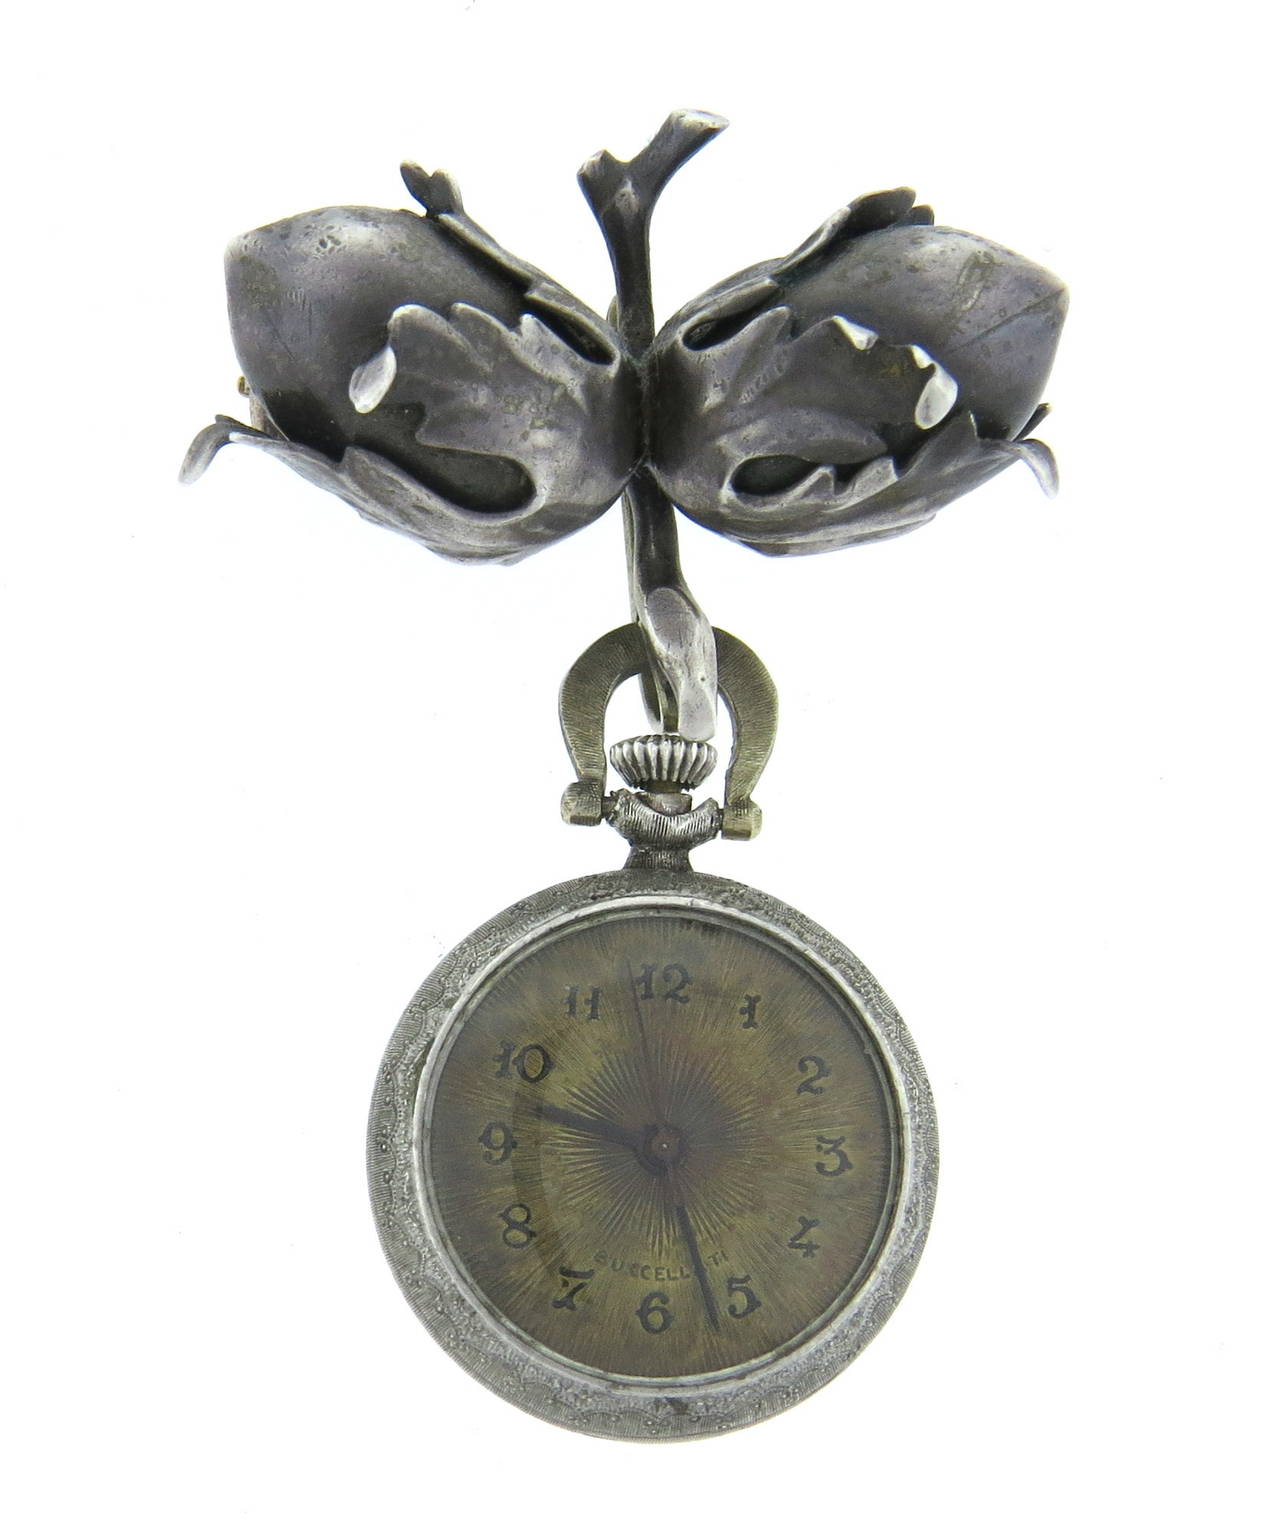 Buccellati silver acorn brooch with suspended lapel manual wind watch. Brooch measures 37mm x 26mm (excluding the watch),  watch case measures 24mm in diameter and 33mm long with bale. Manual wind movement in running order. Dial and pin closure are